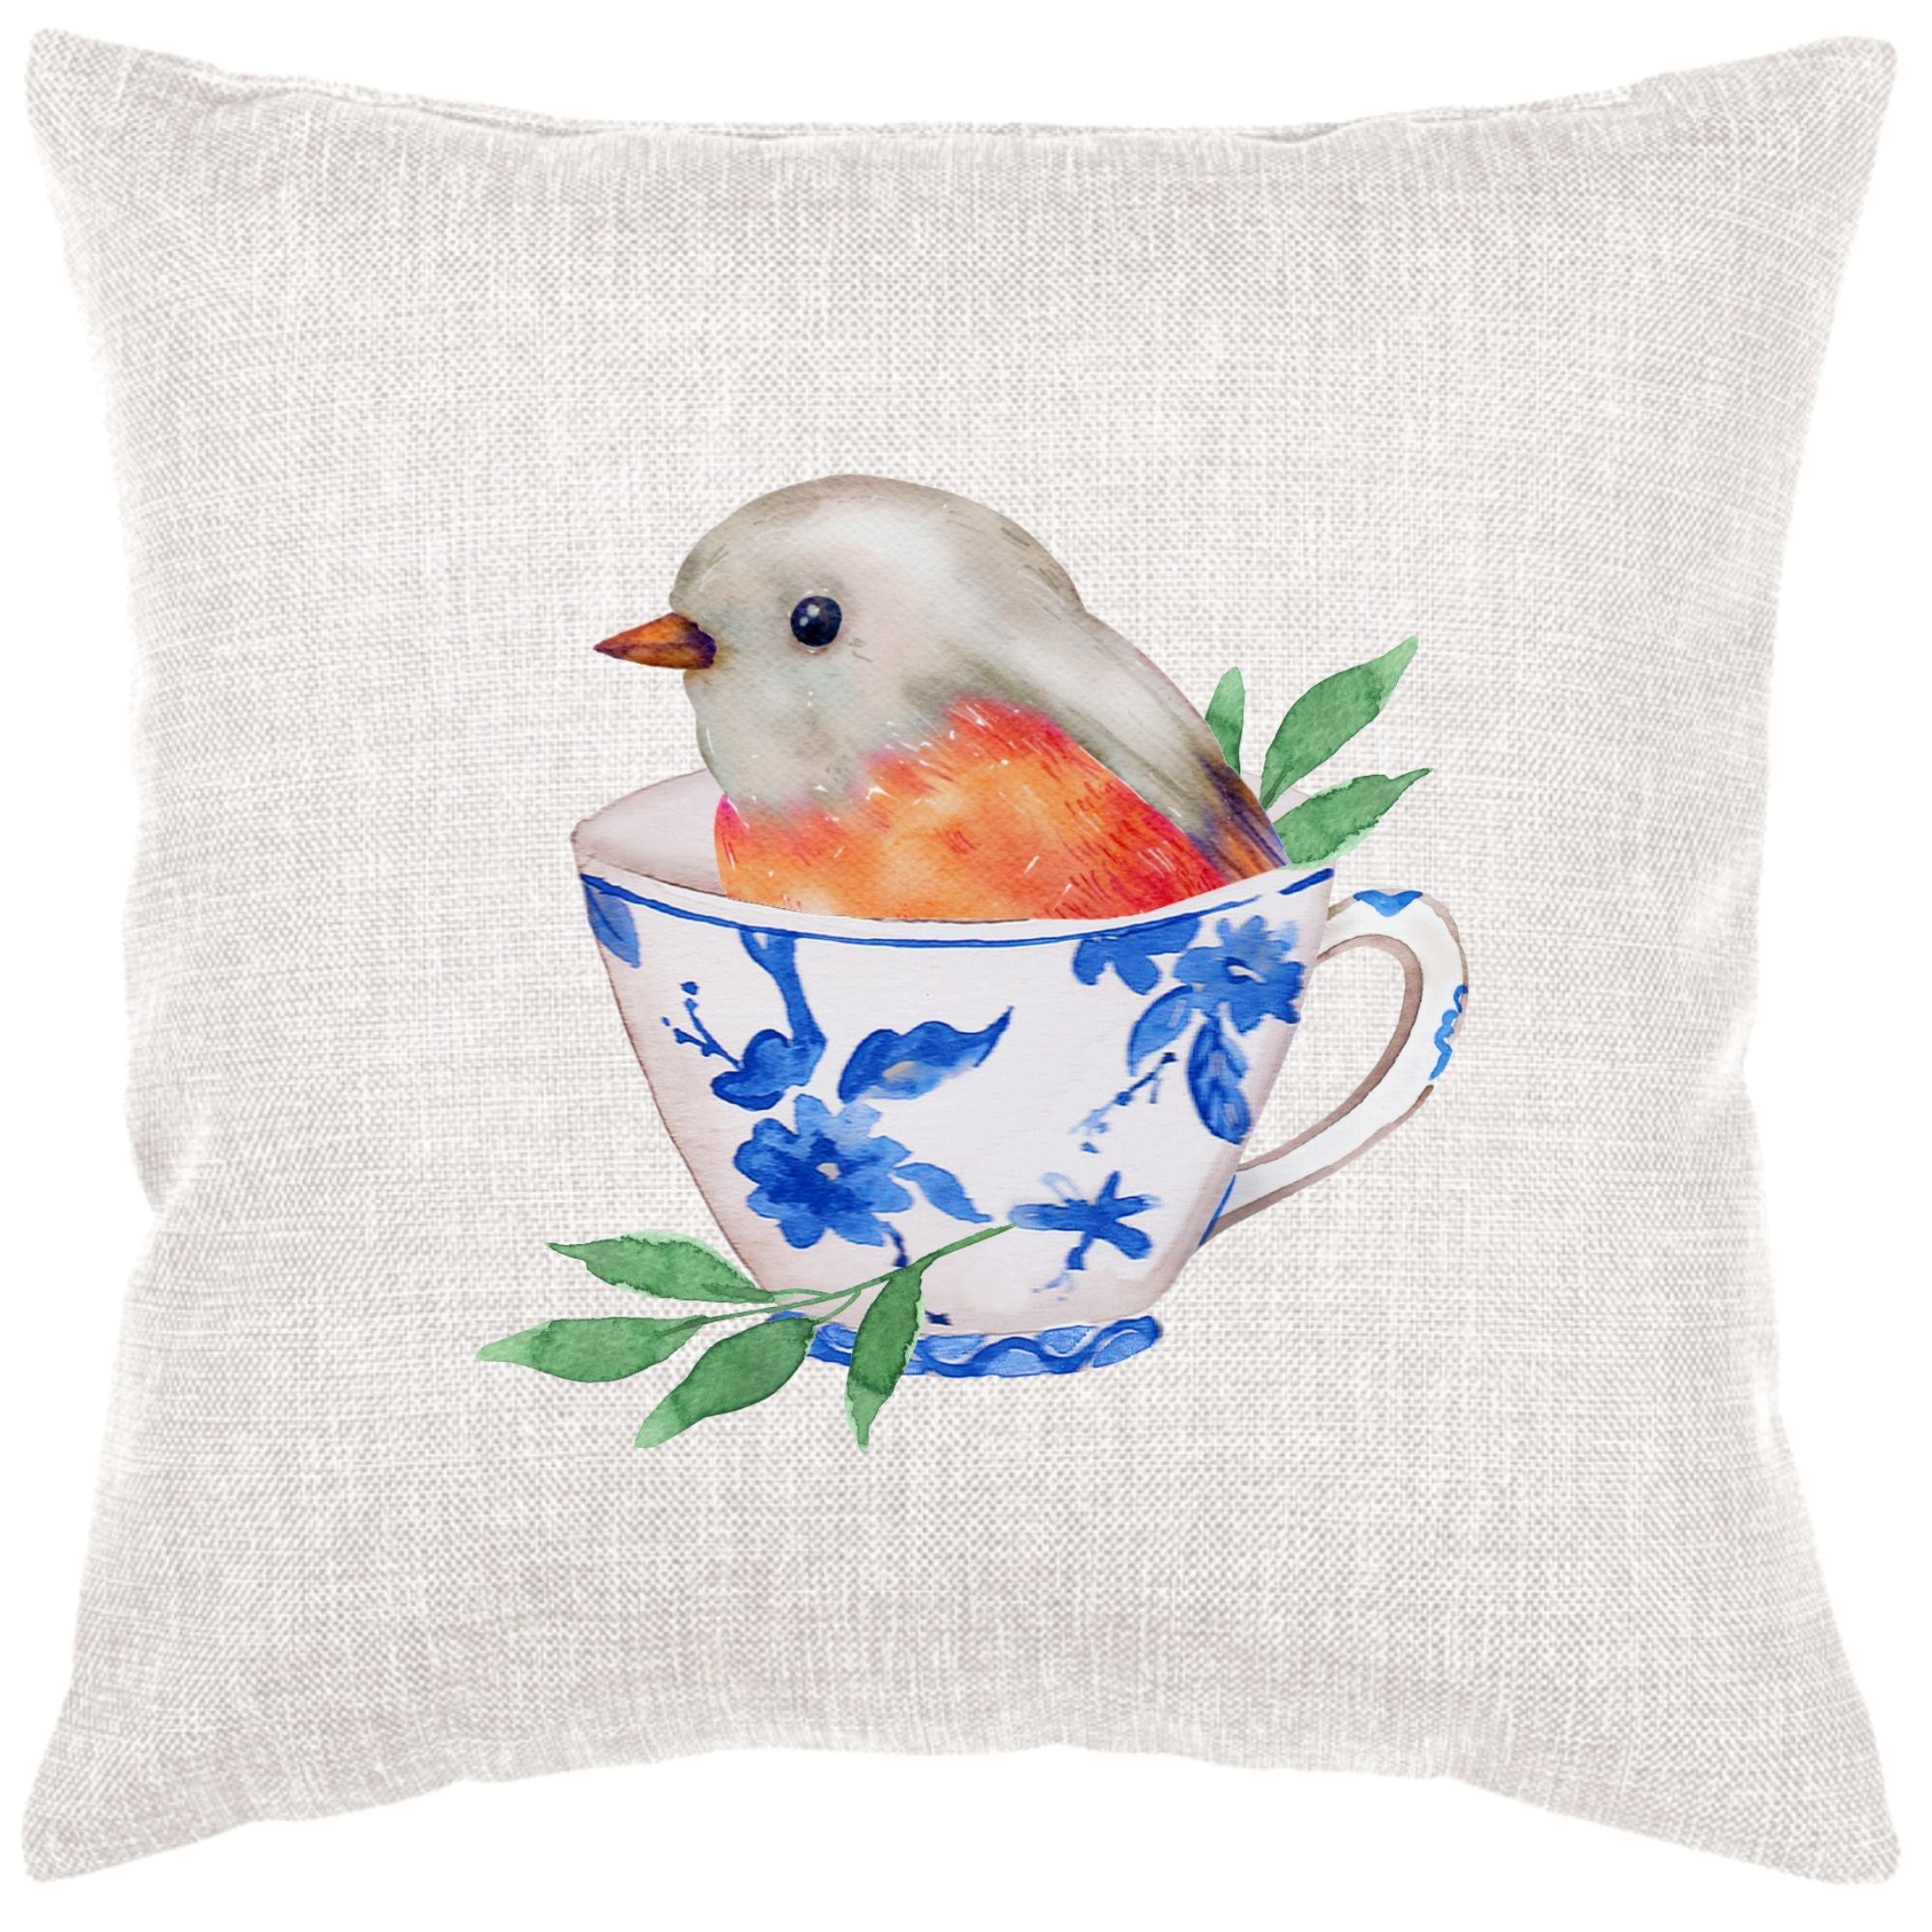 Blue And White Teacup And Bird Down Pillow